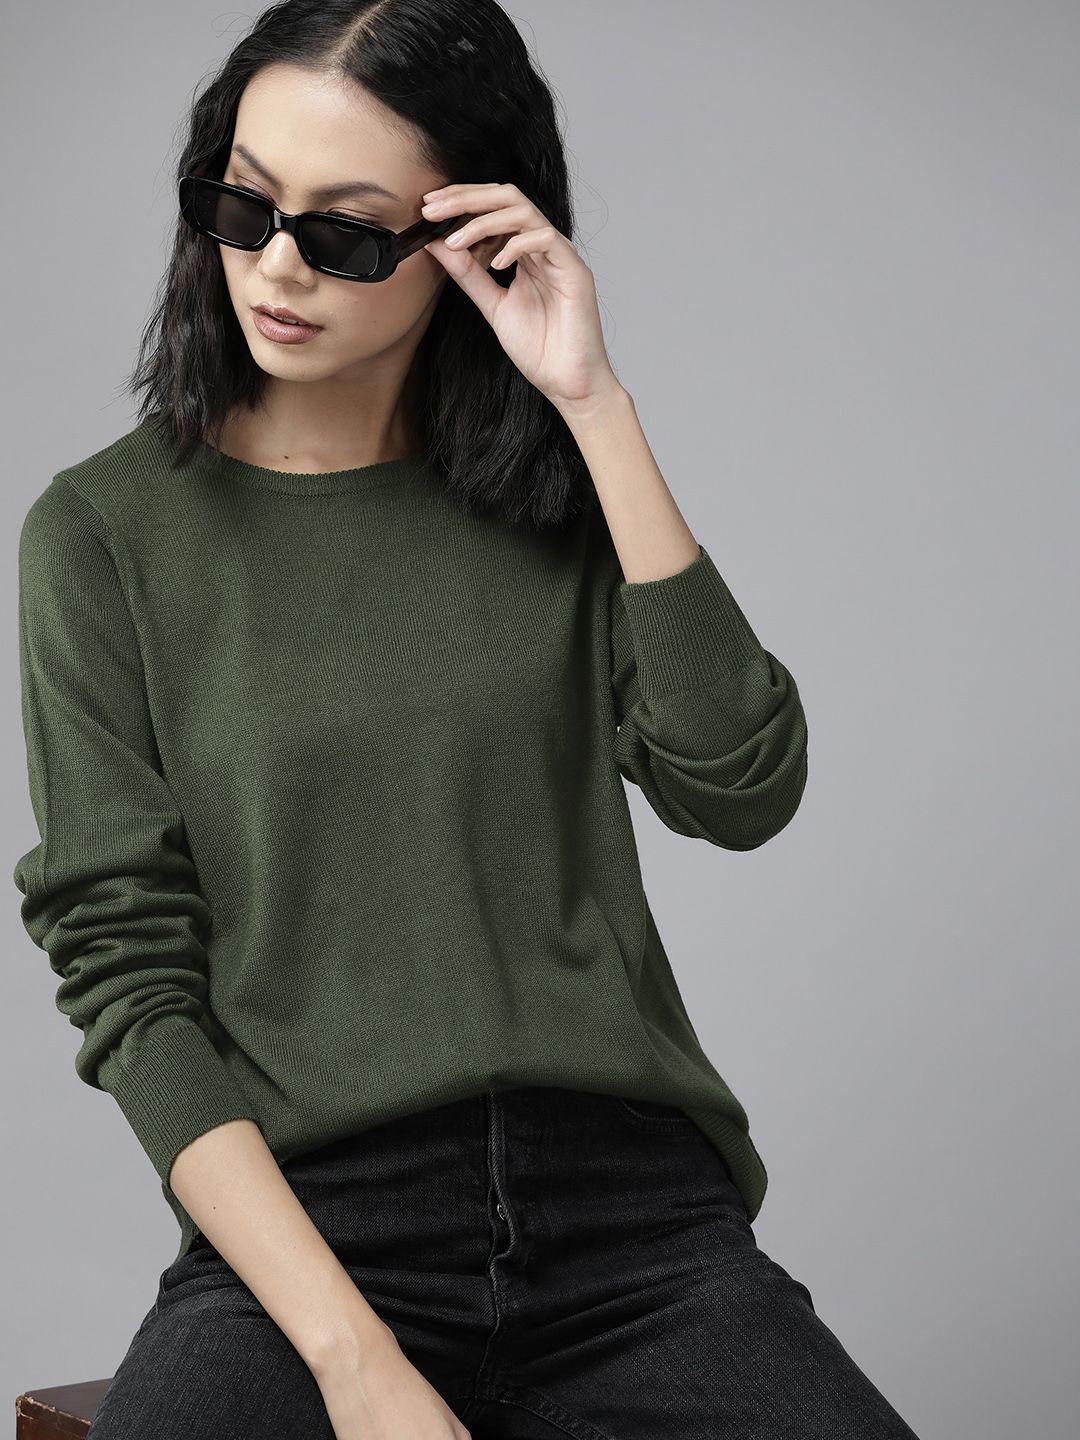 the roadster lifestyle co. women olive green knitted pullover